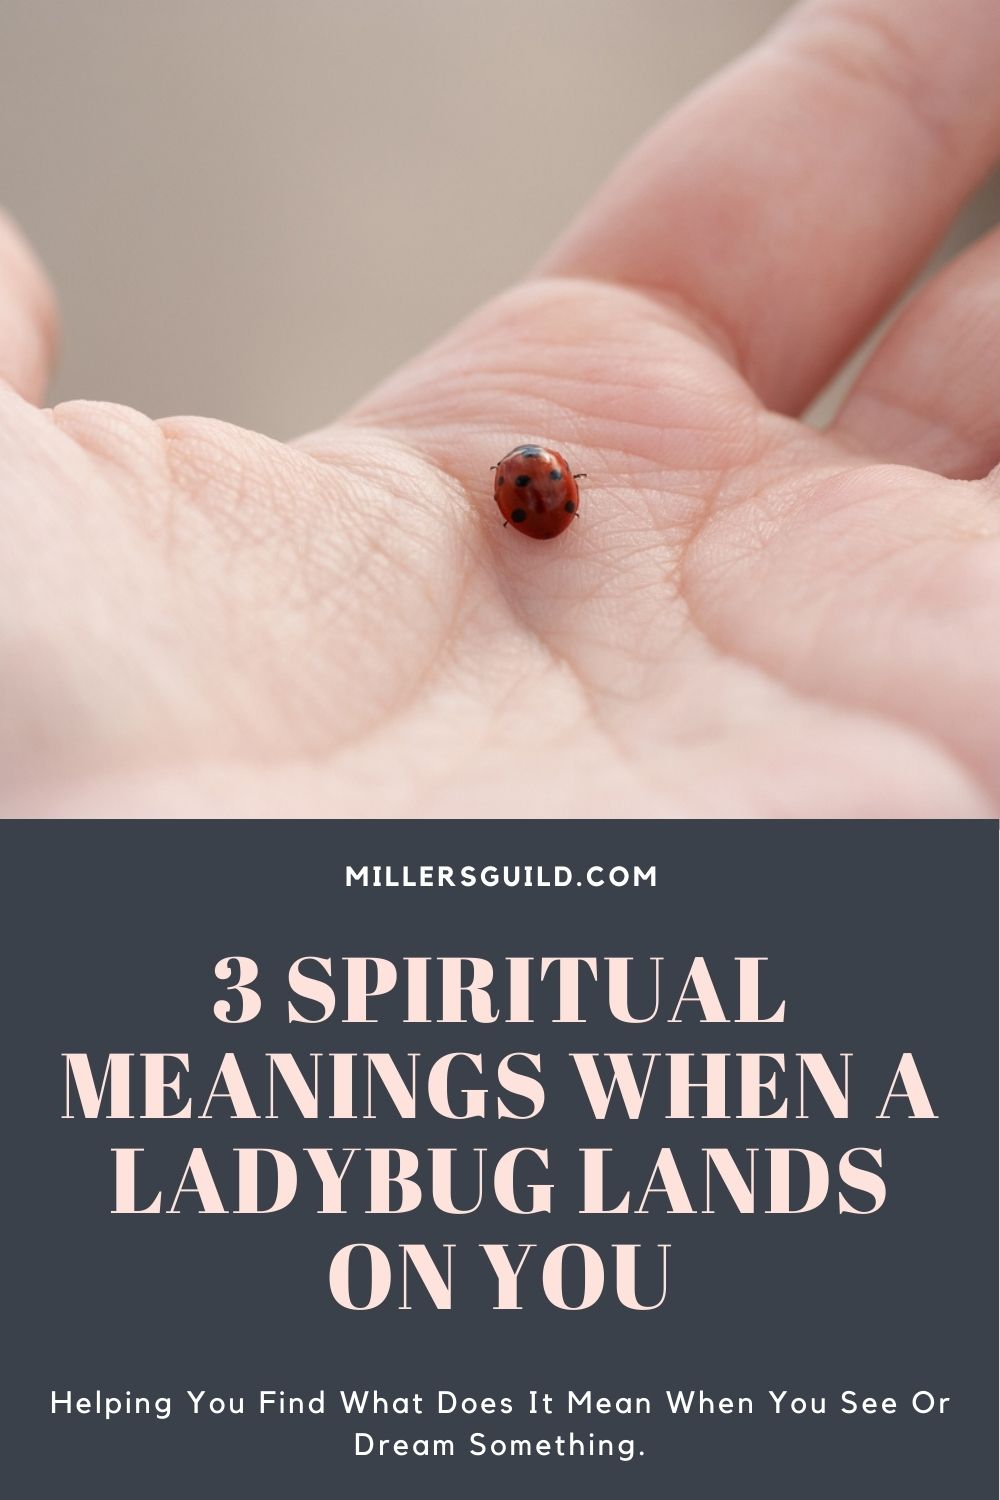 Spiritual Meanings When a Ladybug Lands on You